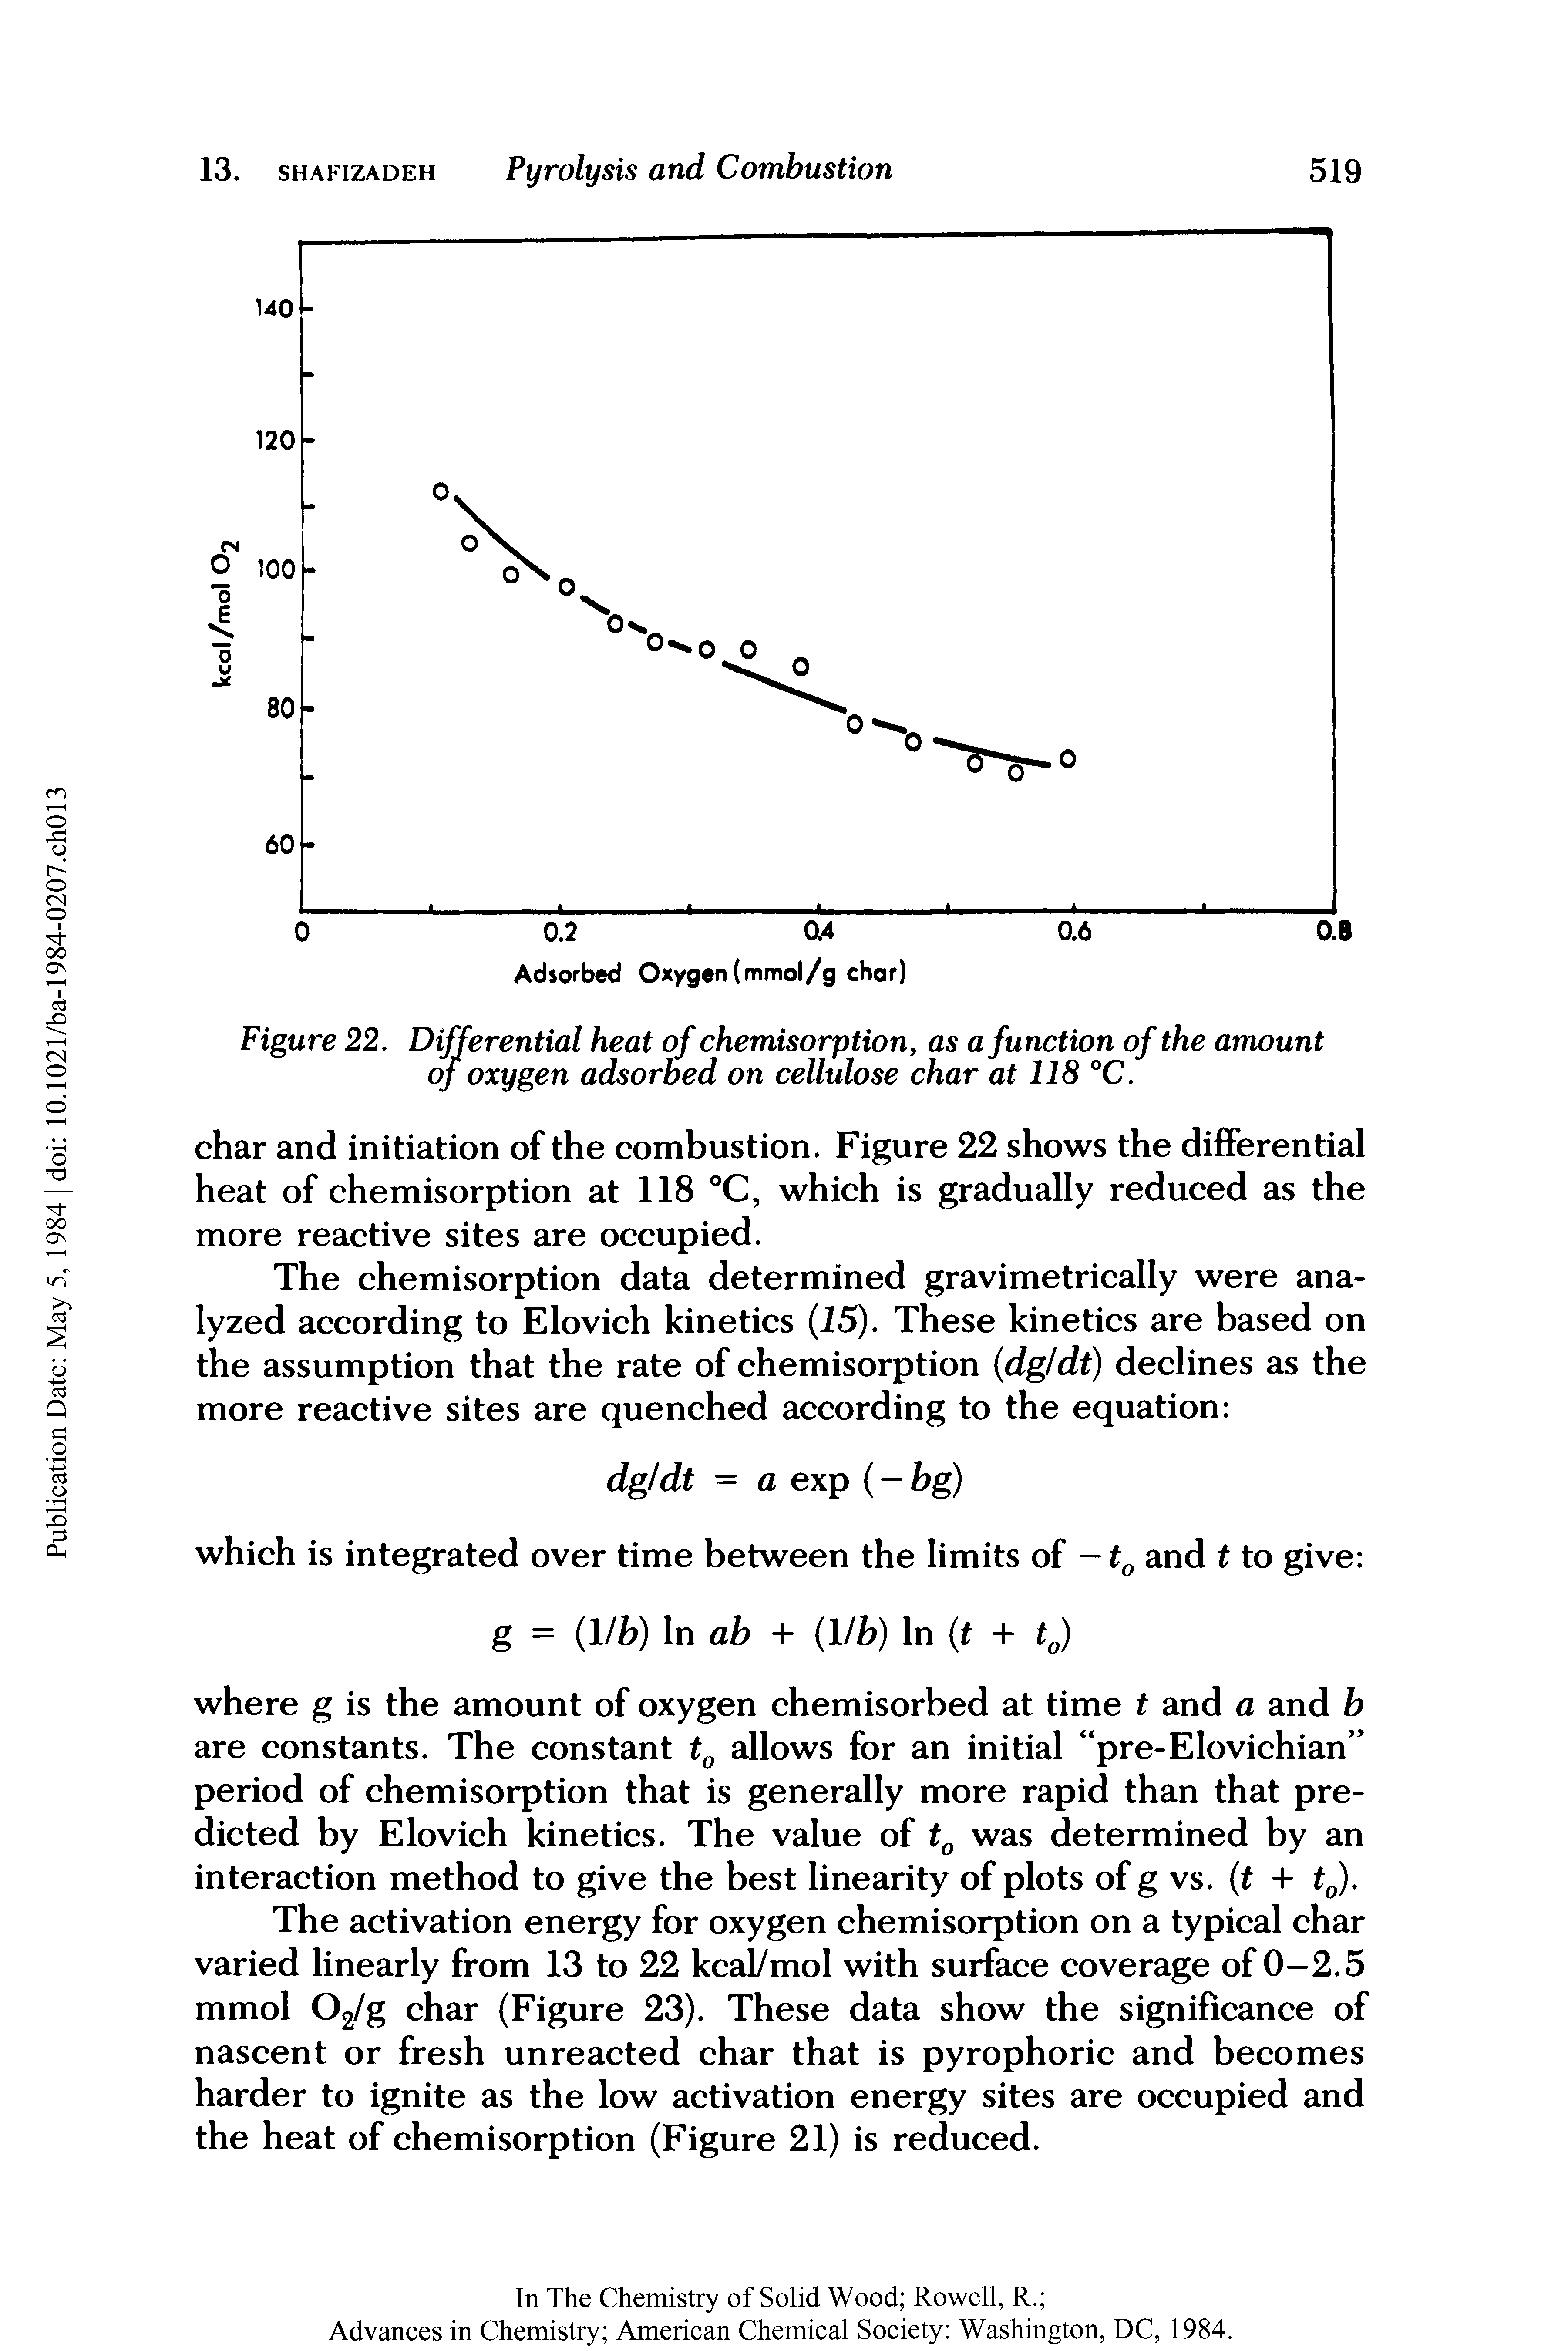 Figure 22, Differential heat of chemisorption as a function of the amount of oxygen adsorbed on cellulose char at 118 °C.